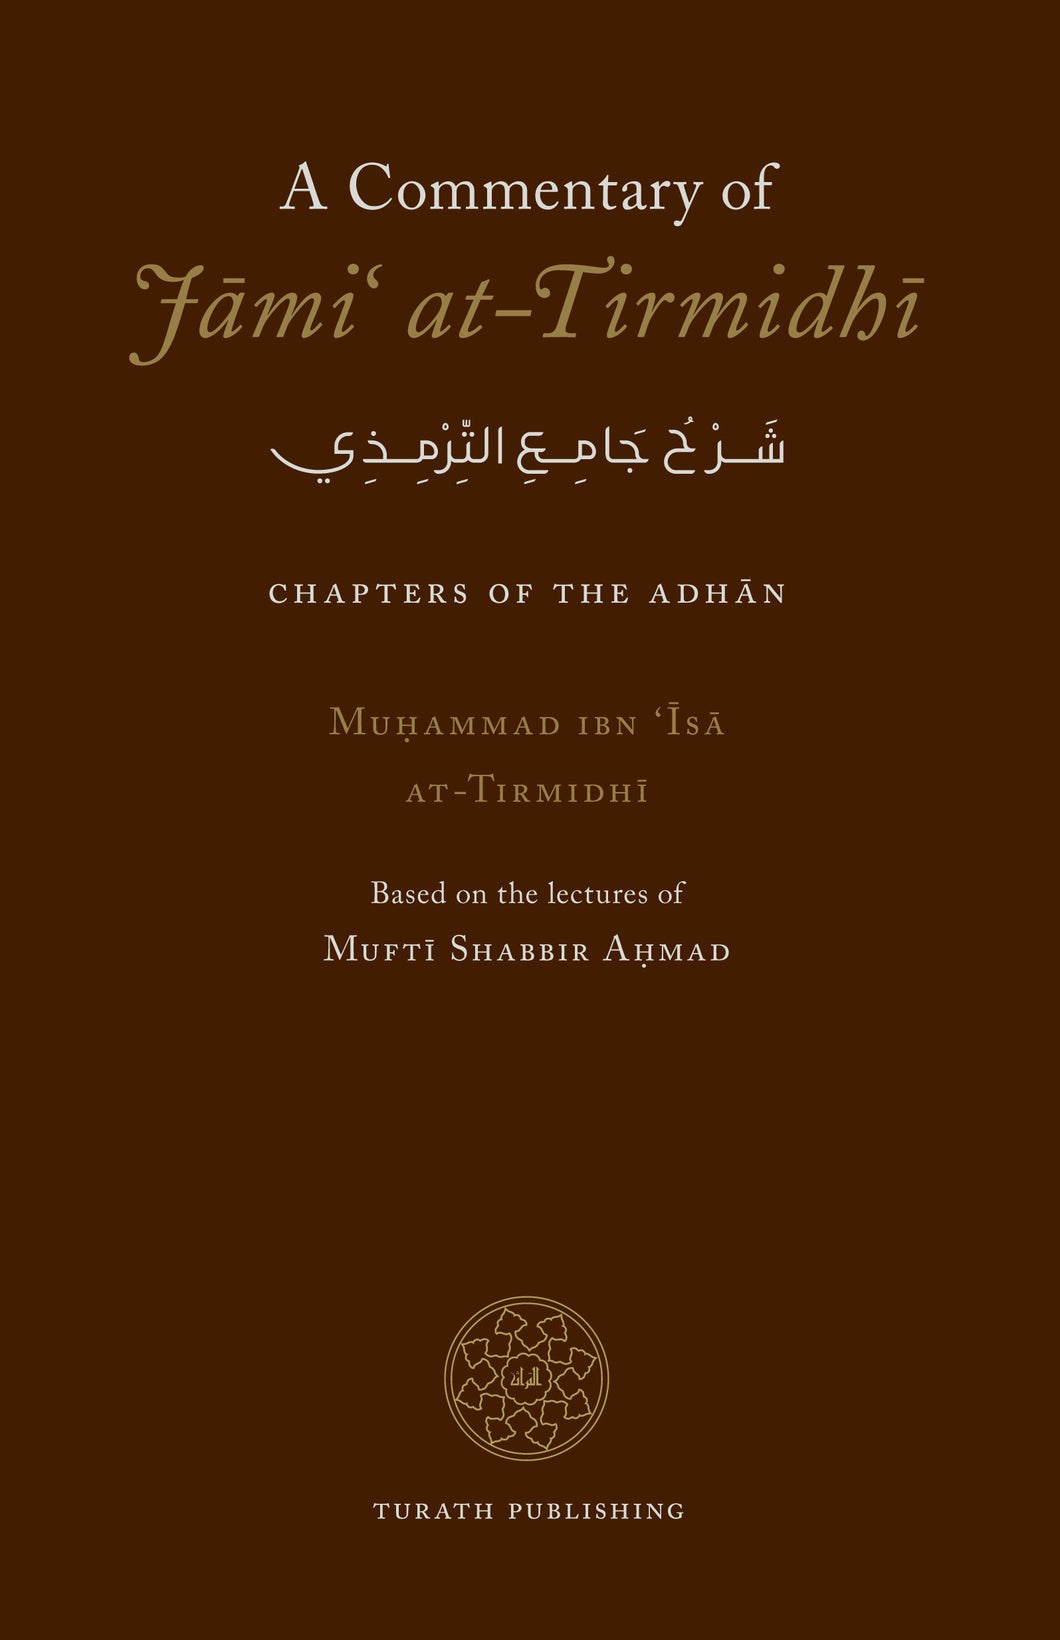 A Commentary of Jami' at-Tirmidhi: Chapters of the Adhan